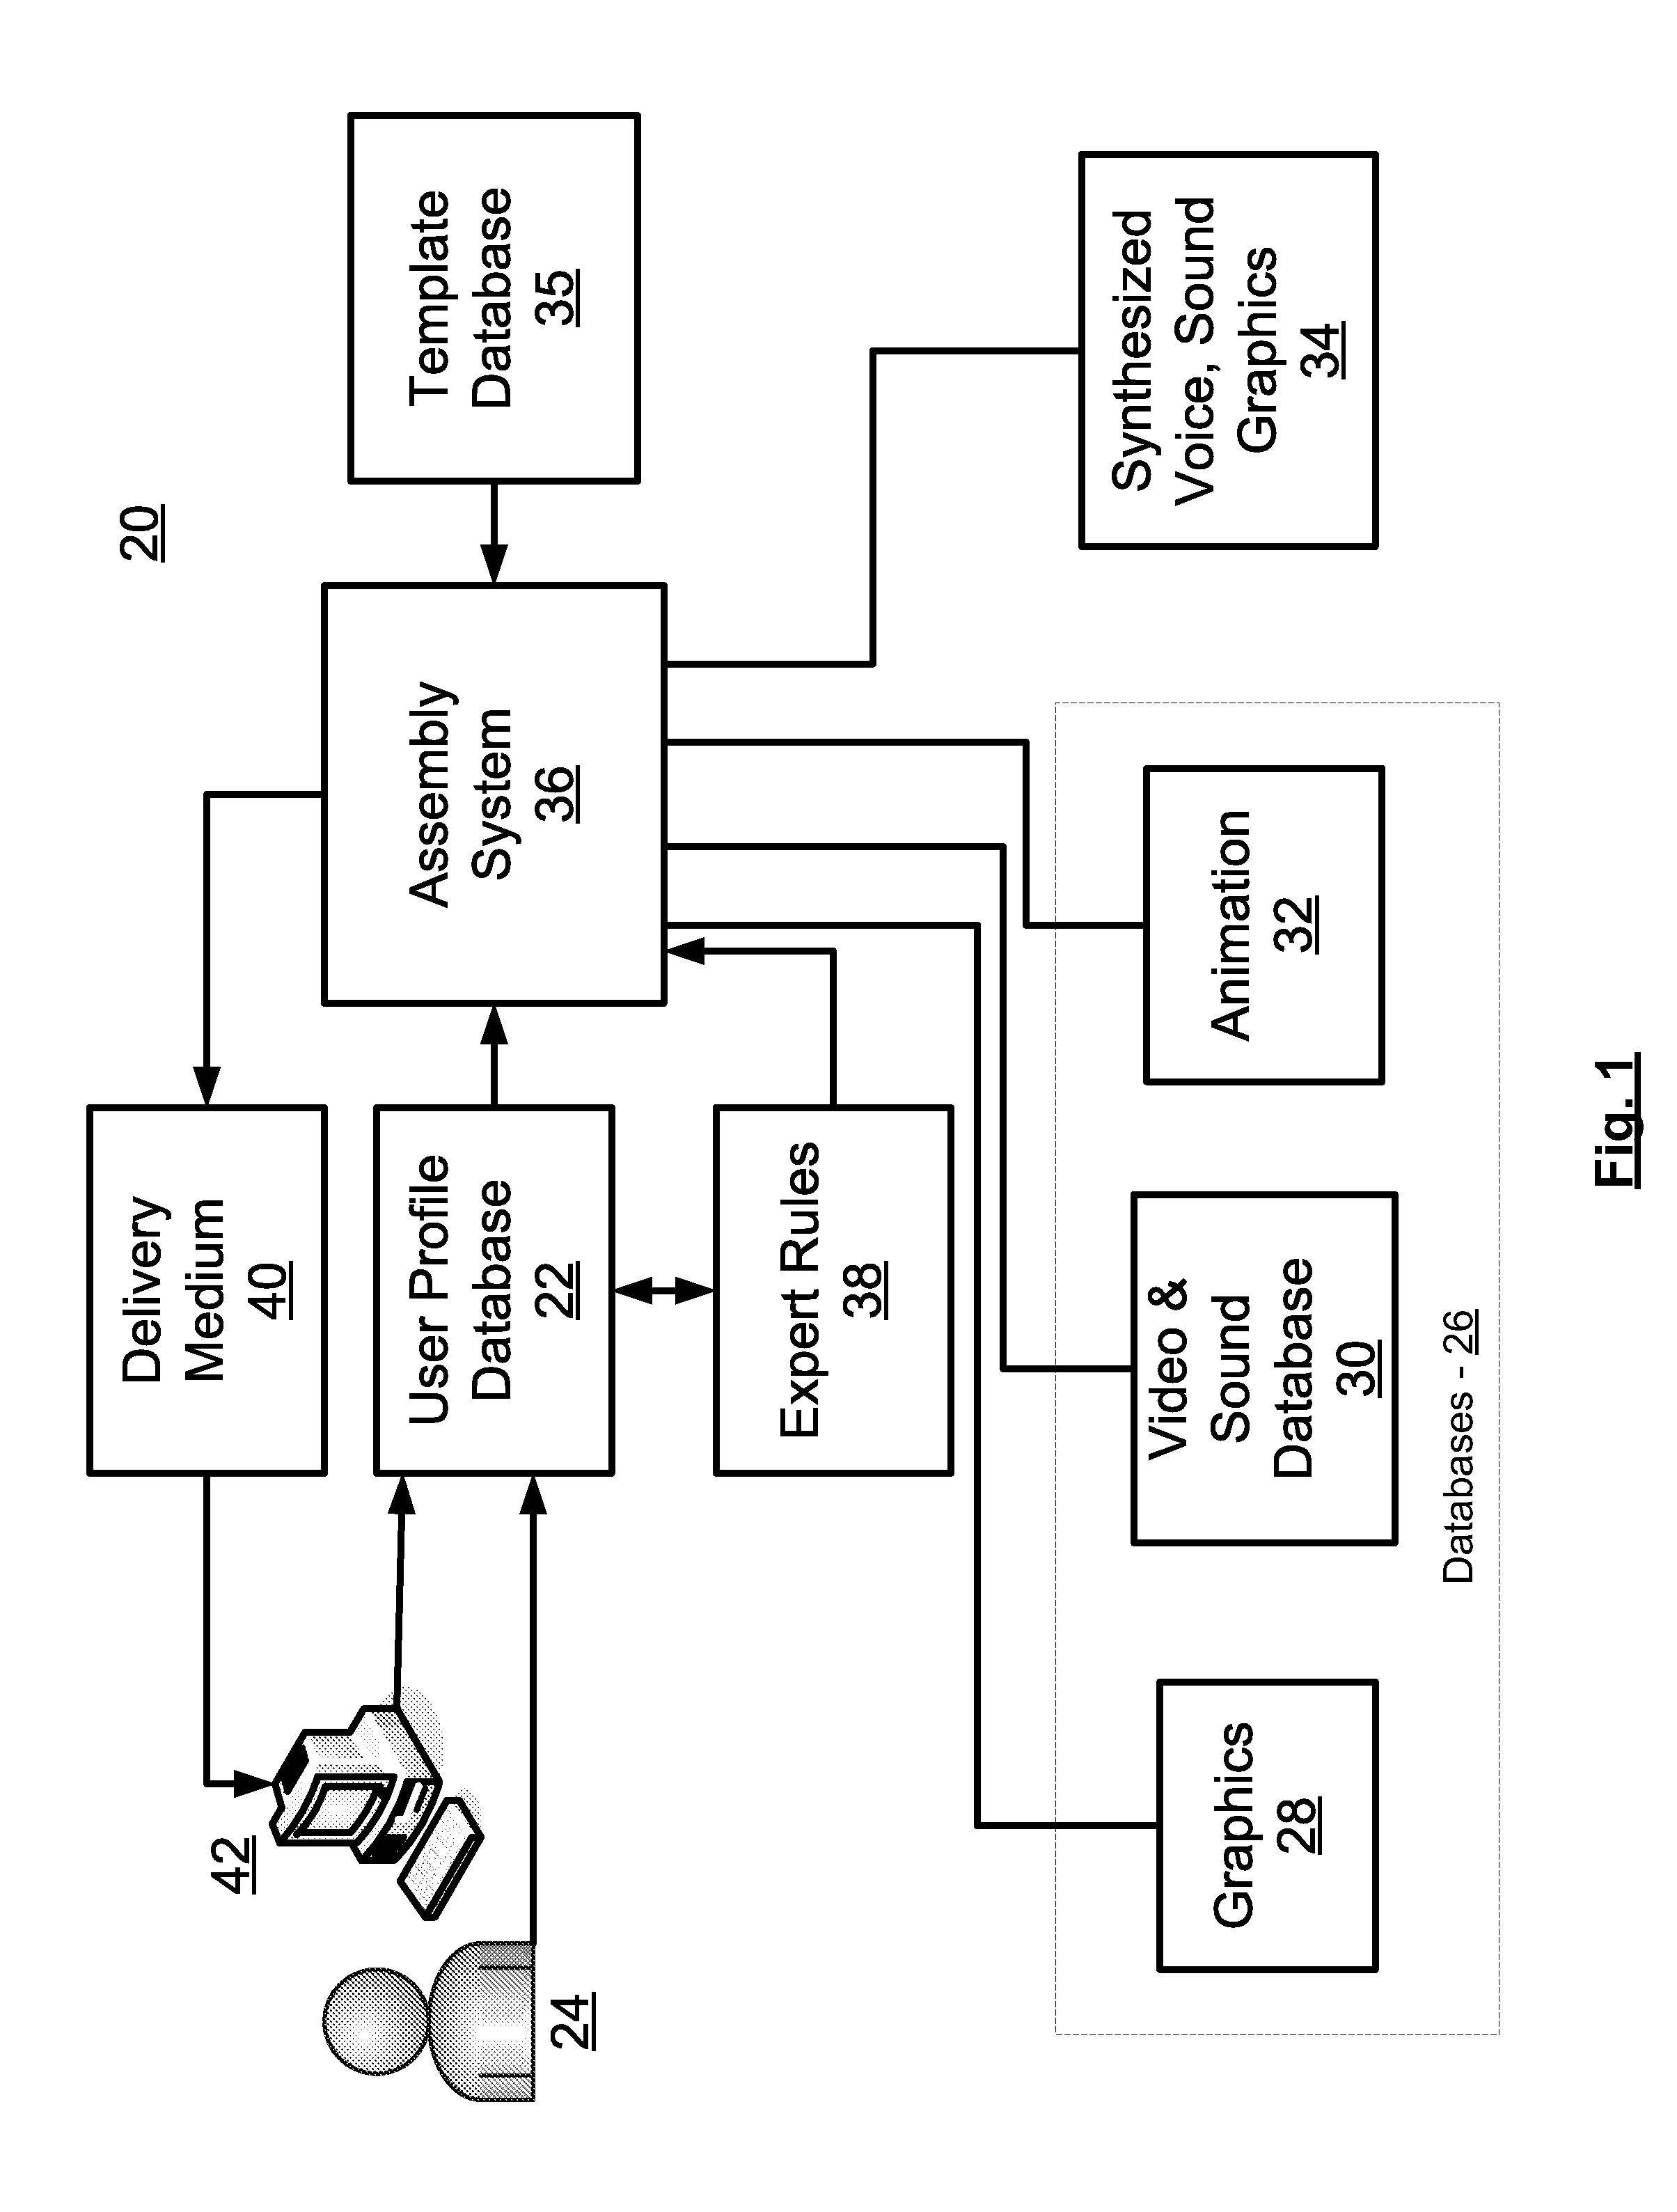 System and method for personalized message creation and delivery